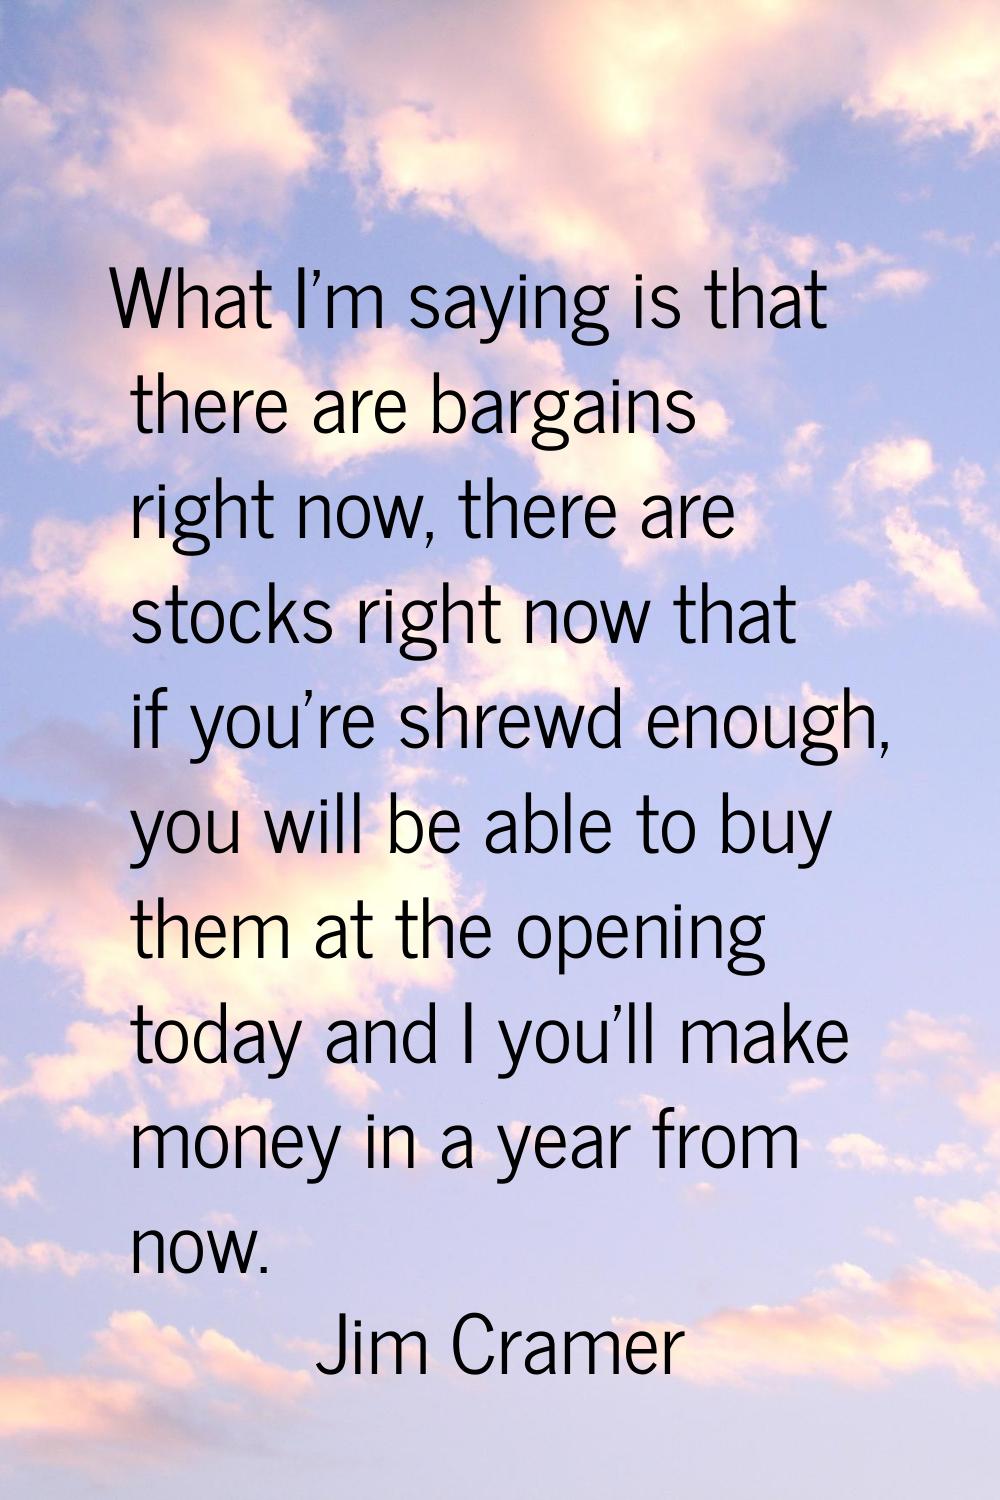 What I'm saying is that there are bargains right now, there are stocks right now that if you're shr